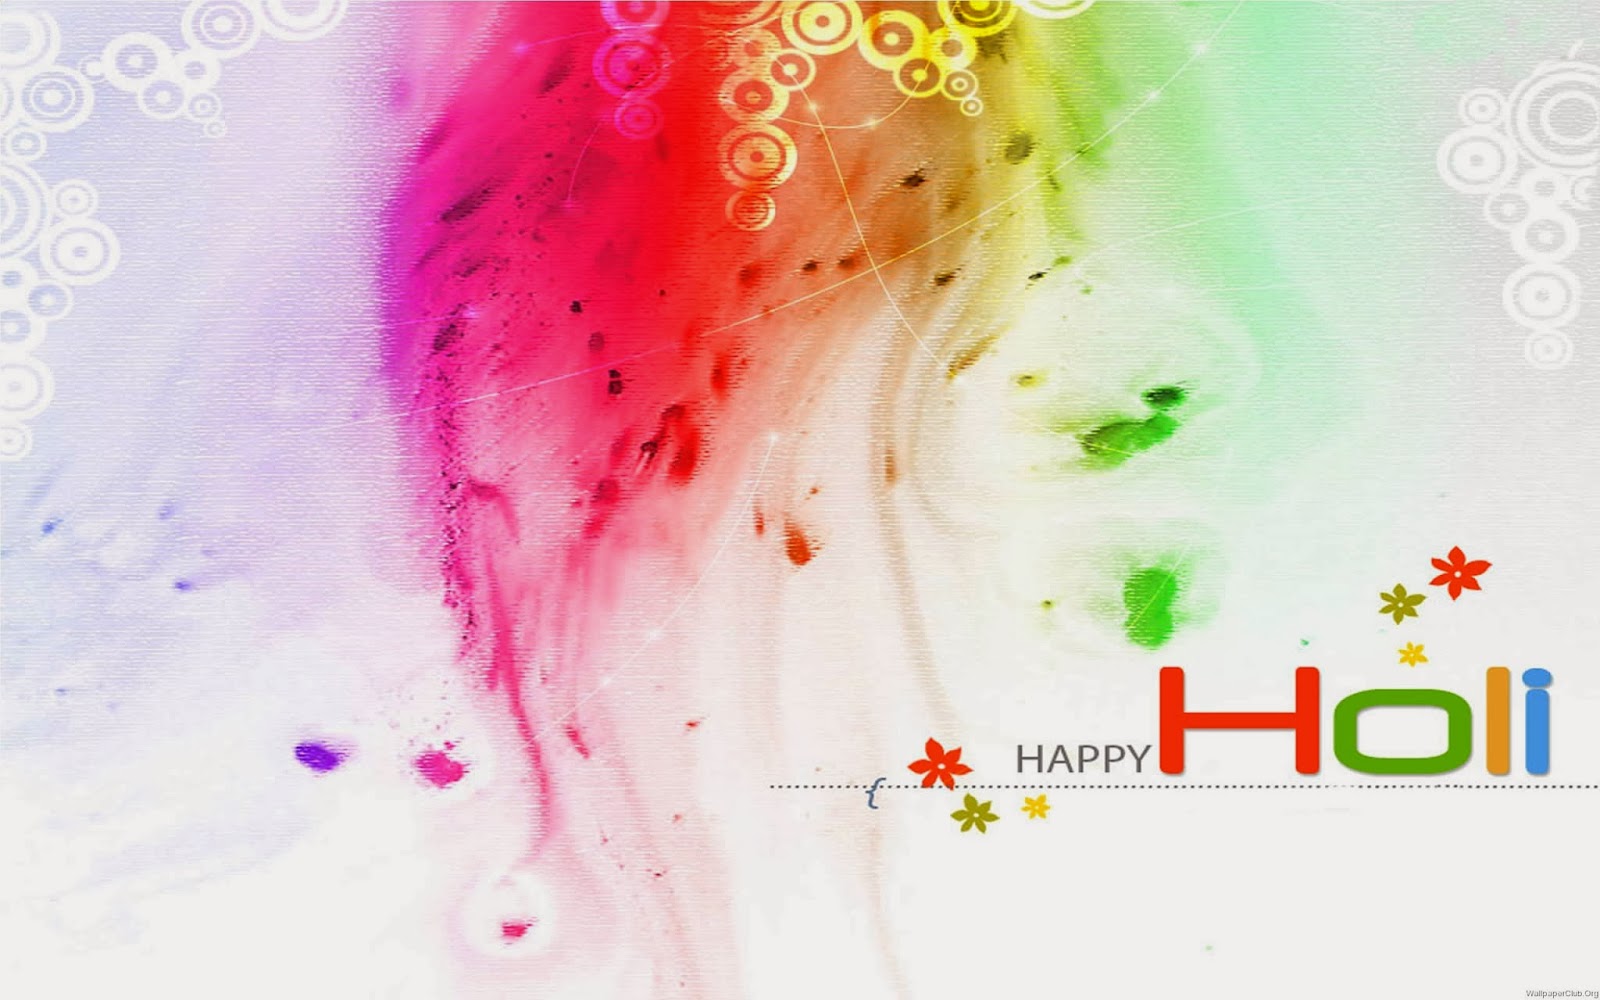 Happy Holi Sms Holi Sms In Hindi Holi Sms In English 2014 Mothers